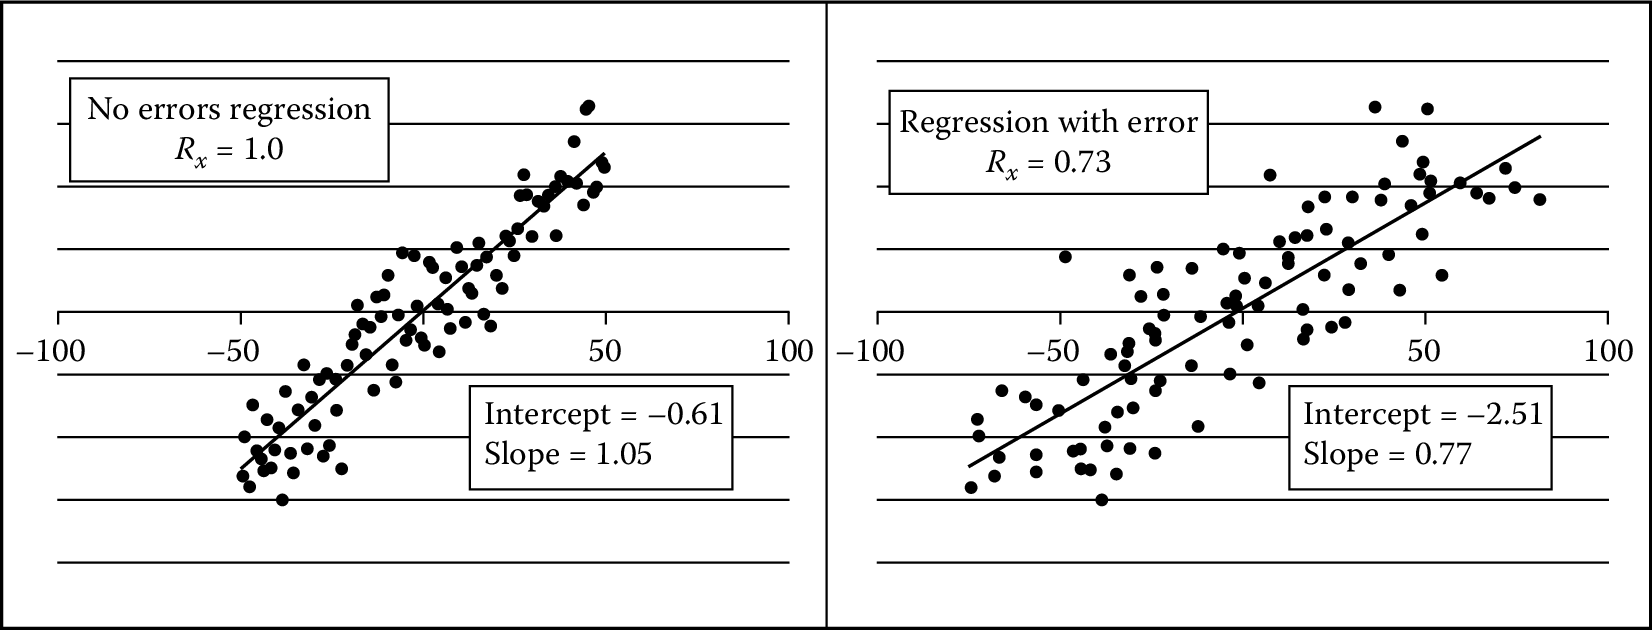 Regression of *y* on *x* with and without variable error. On the left is the population regression with no error in the *x* variable. On the right, variable error was added to the *x*-values with a reliability ratio of 0.73. Note its attenuated slope, which is very near the theoretical value of 0.77